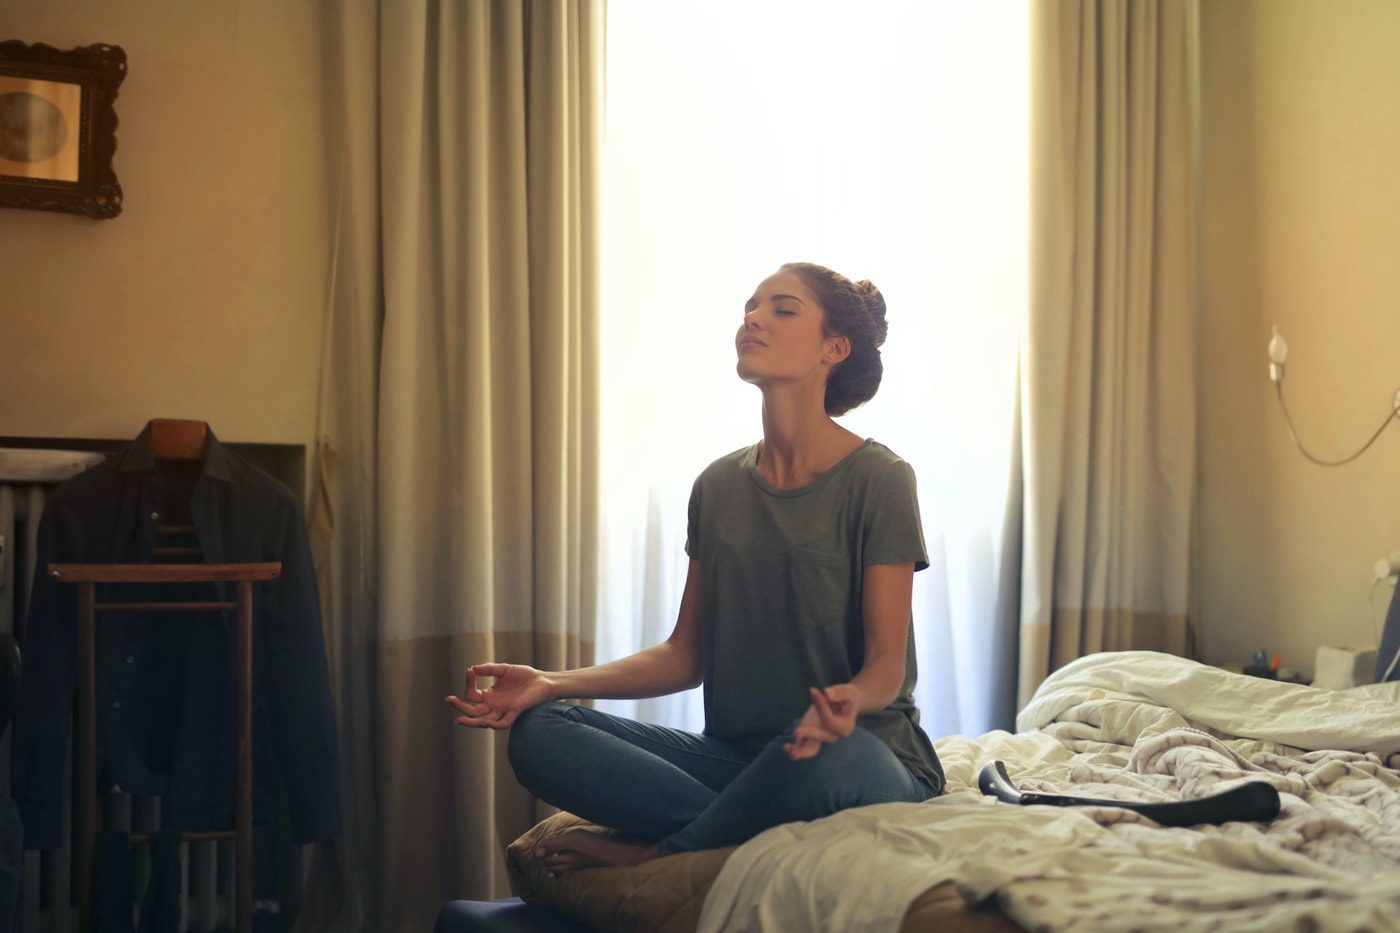 A woman sitting on the edge of her bed meditating while sitting cross-legged.